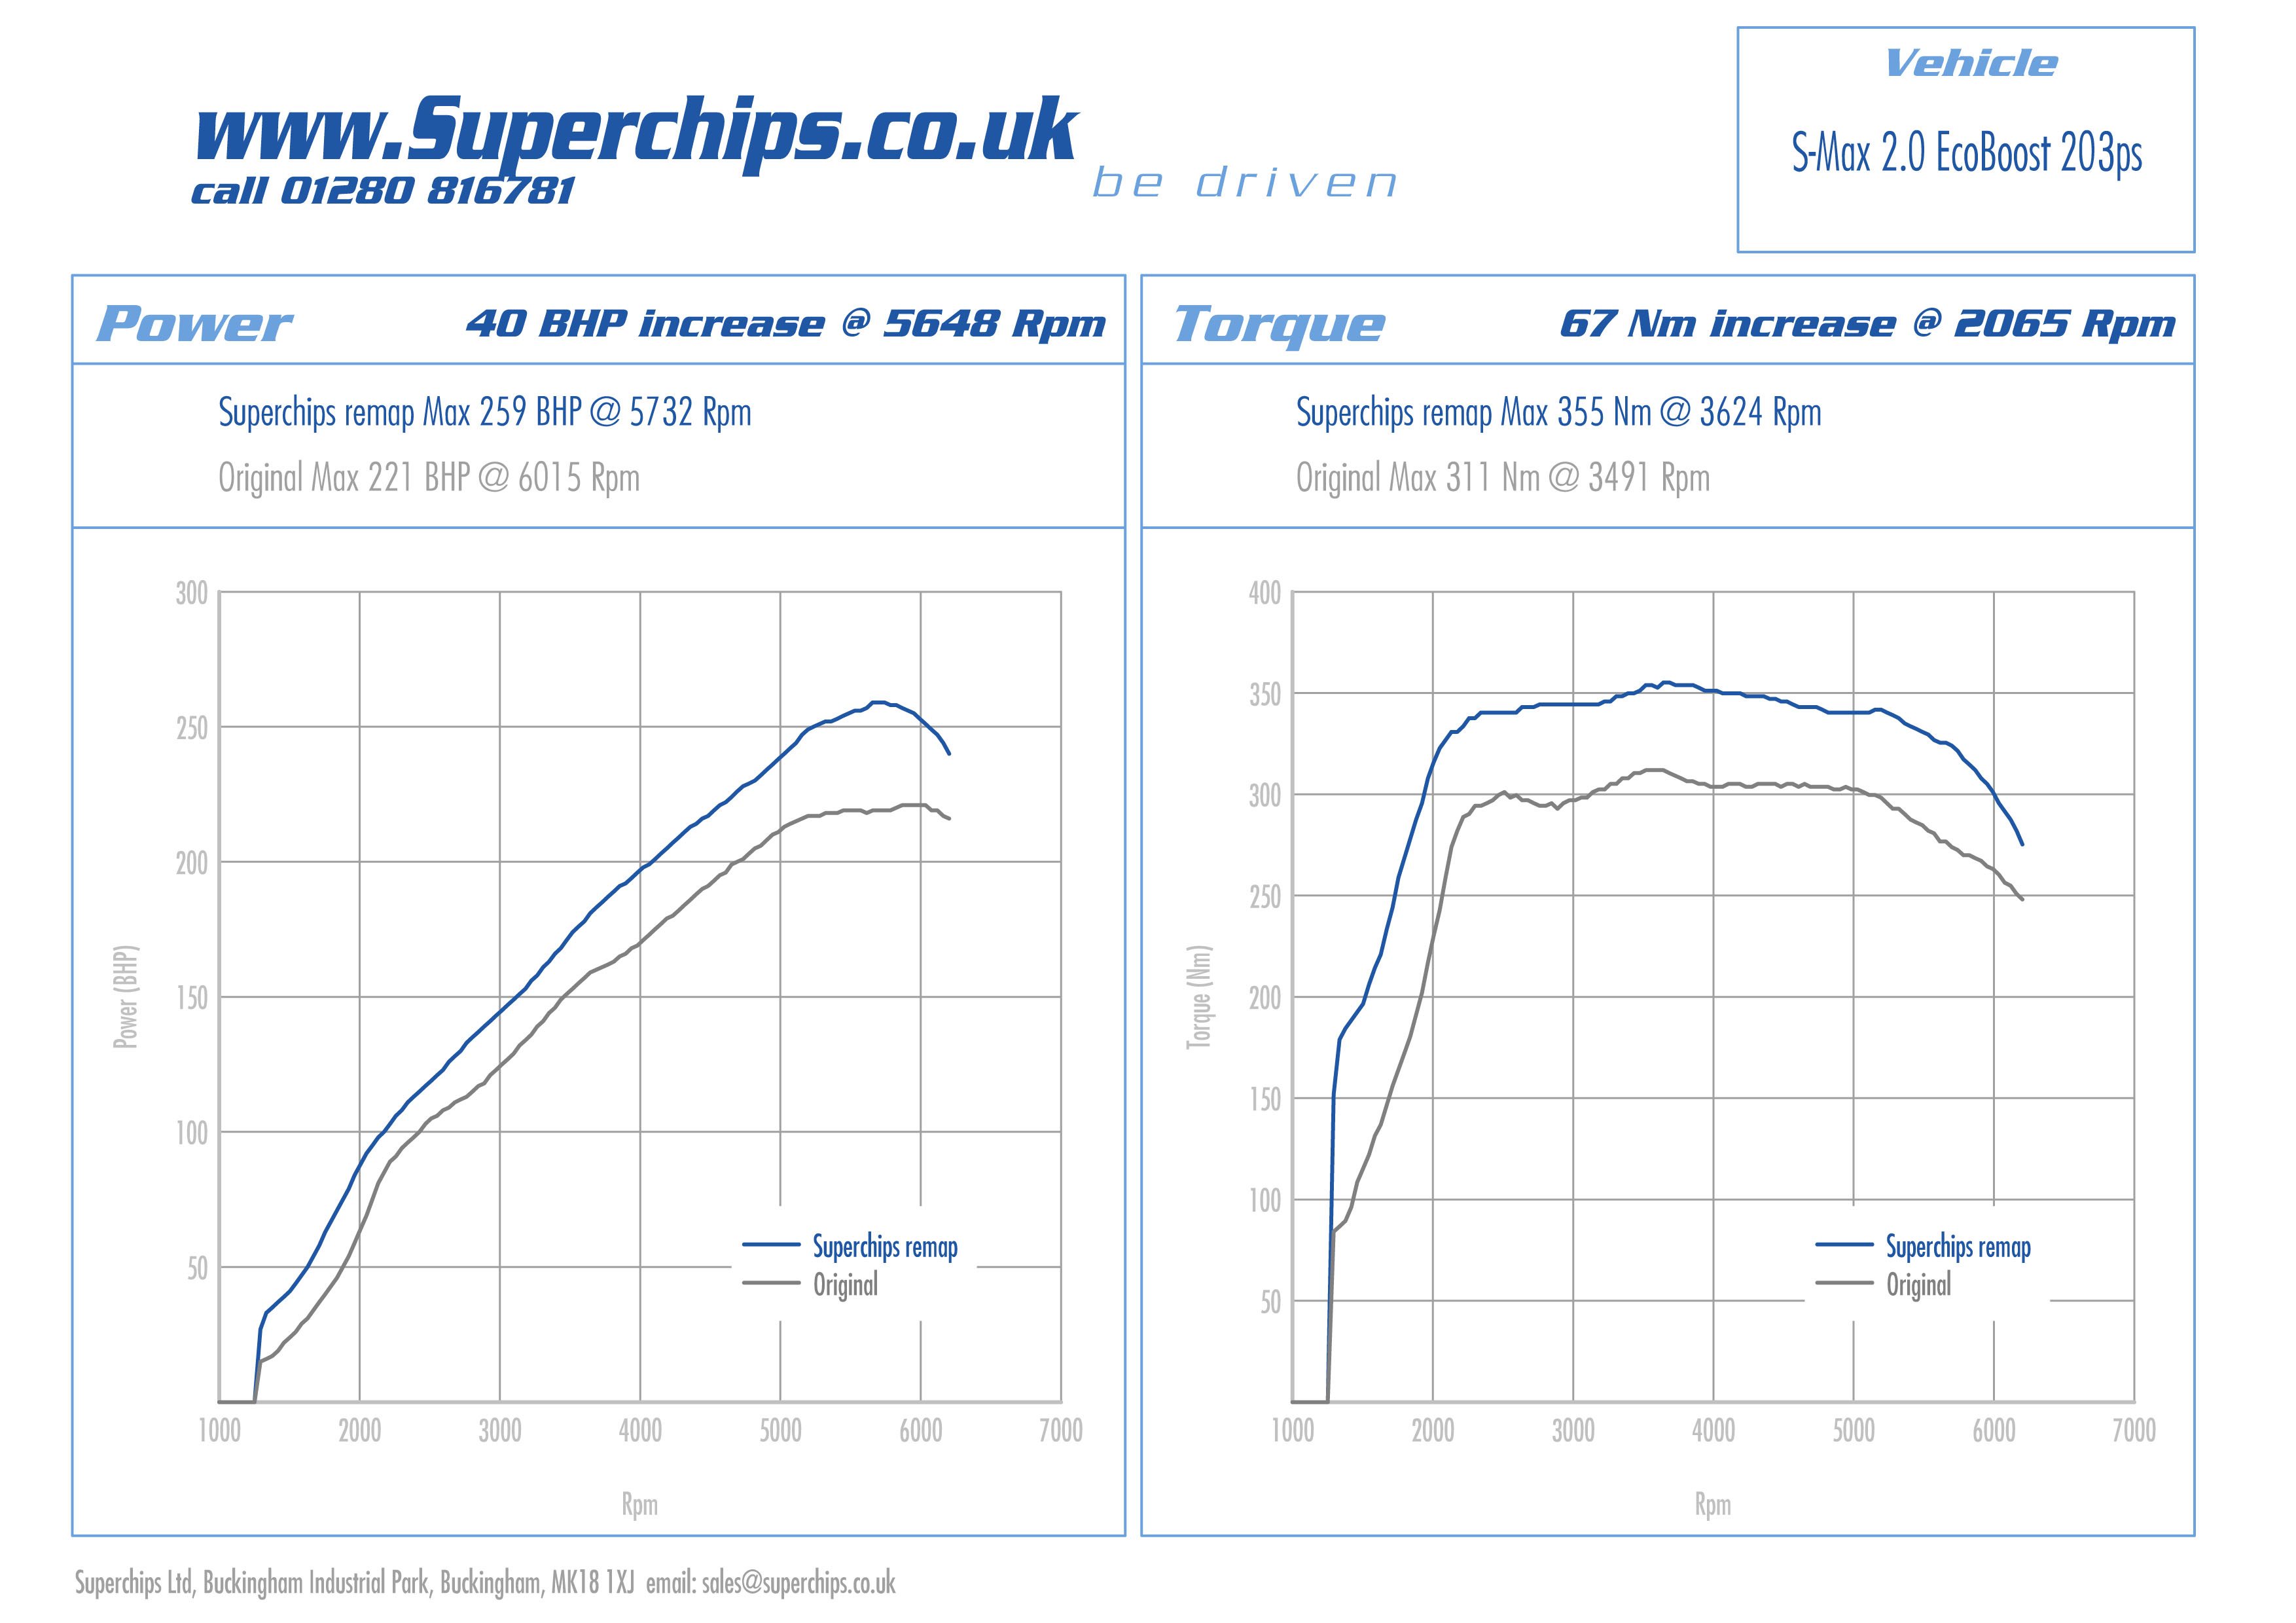 Ford ecoboost 1.6 torque curve #1